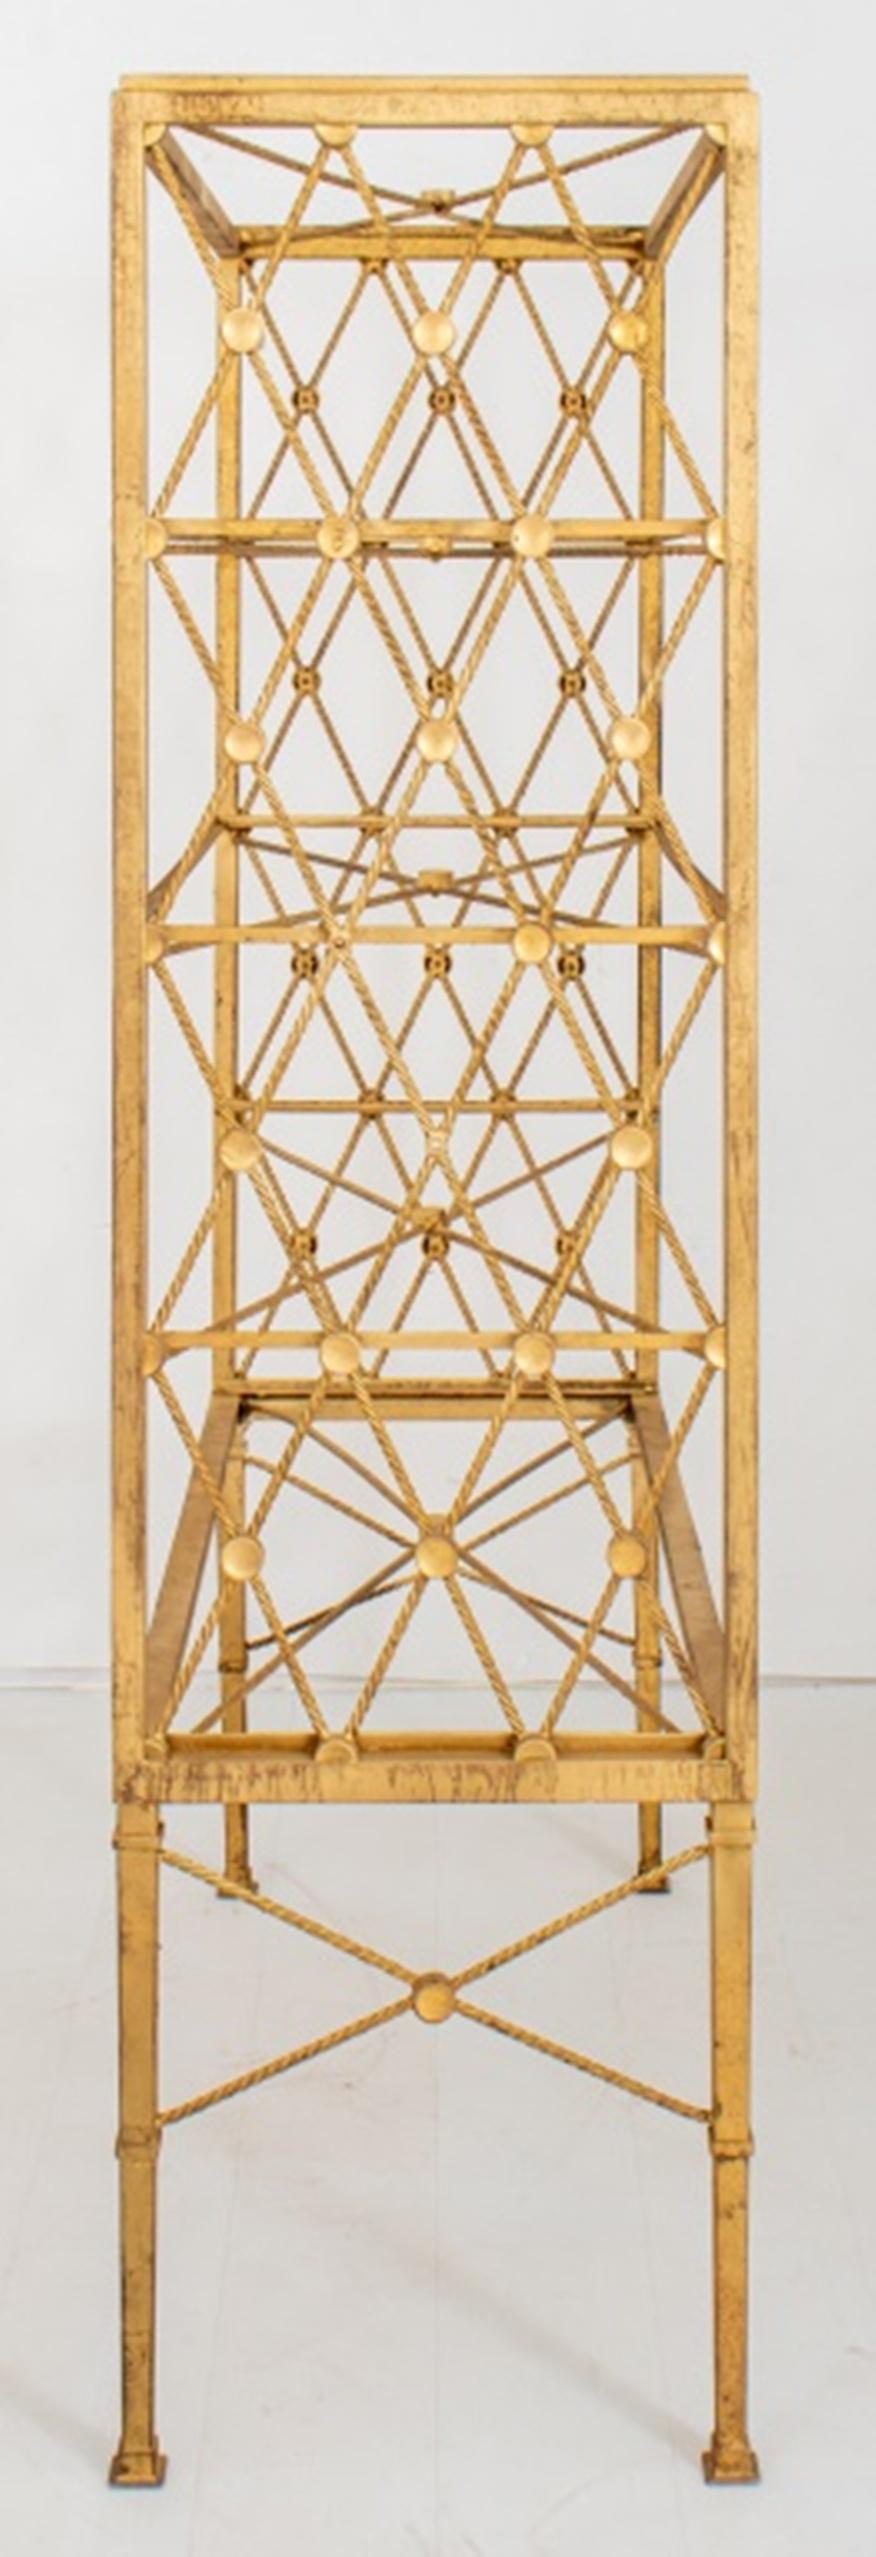 French Art Moderne Gilded Steel Etagere, 1940s For Sale 1